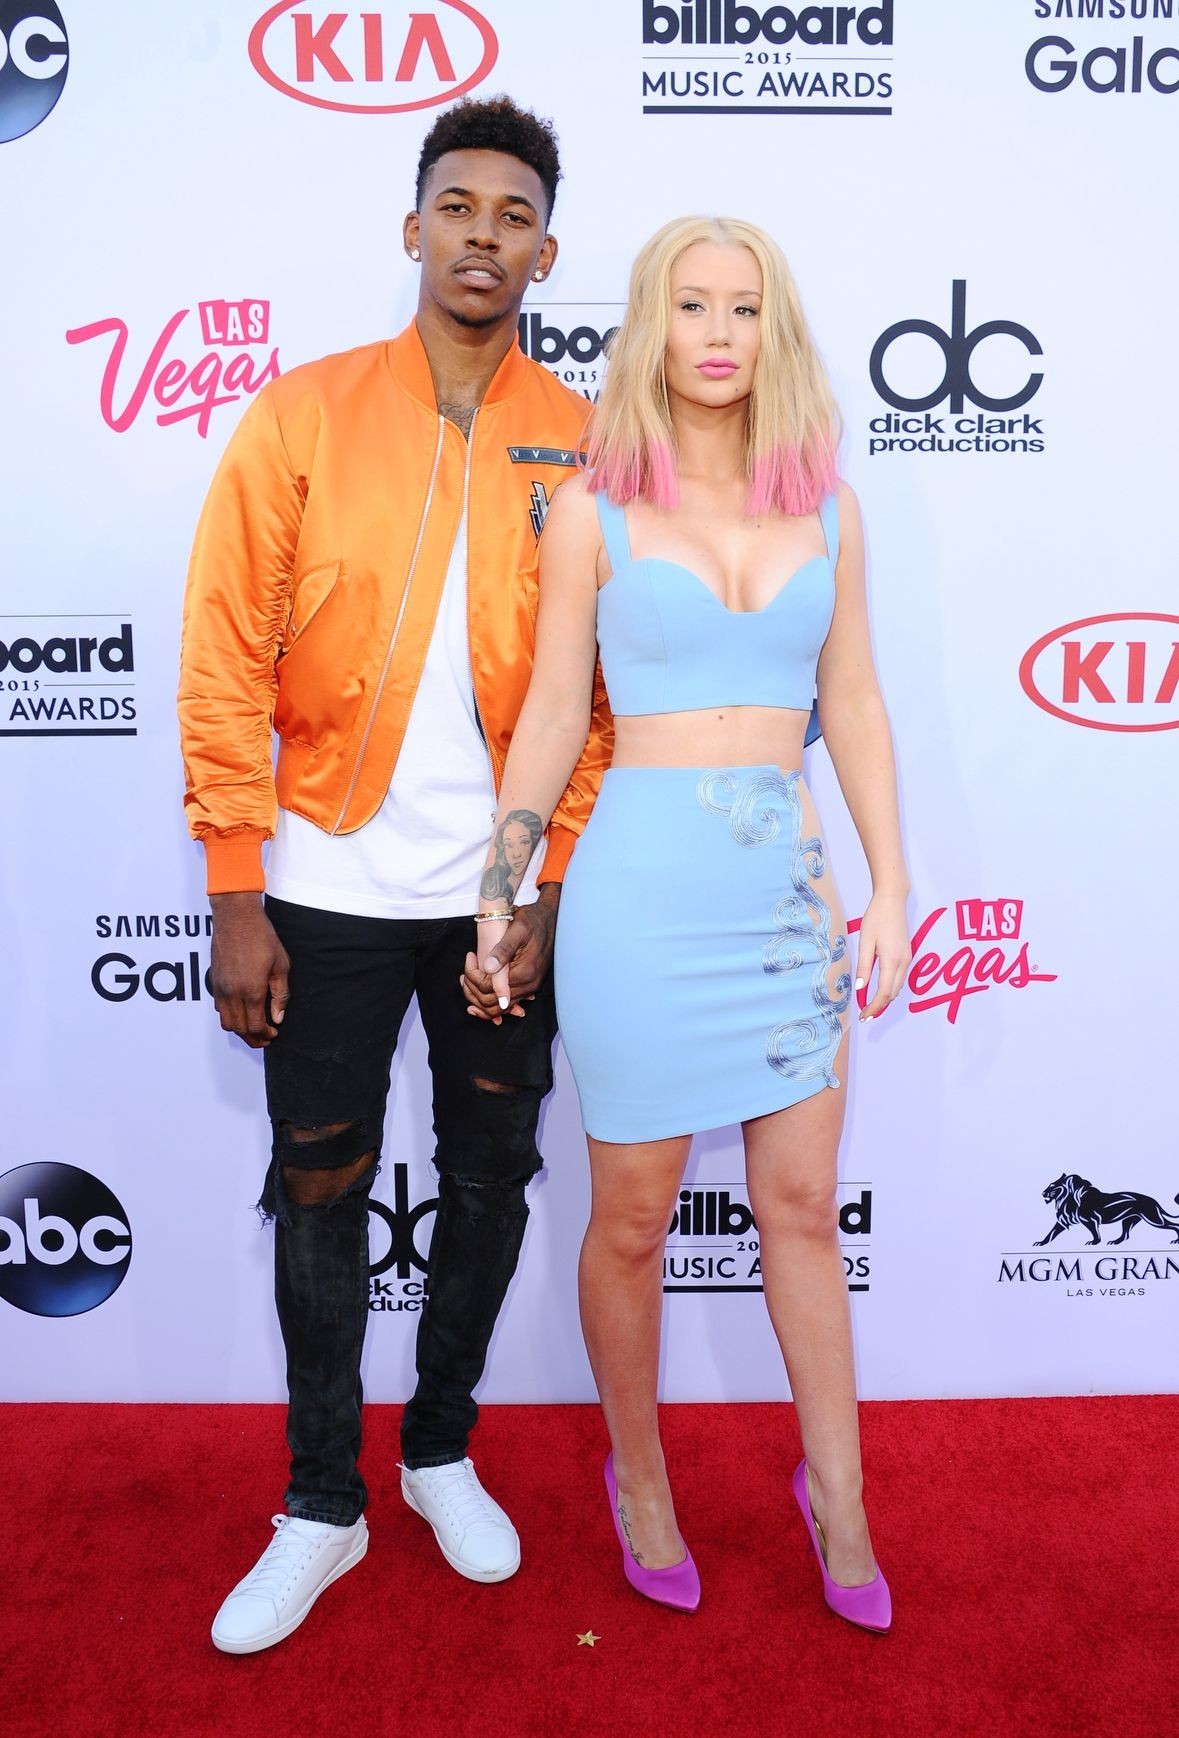 <p>In March 2016, a video leaked of Los Angeles Lakers basketball player Nick Young admitting to cheating on then-fiancée <a href="https://www.wonderwall.com/celebrity/profiles/overview/iggy-azalea-1565.article">Iggy Azalea</a>. The "Fancy" chart-topper took to Twitter to thank Nick's teammate D'Angelo Russell for sneakily filming the admission. A few months later, the couple ended their engagement and called it quits.</p>